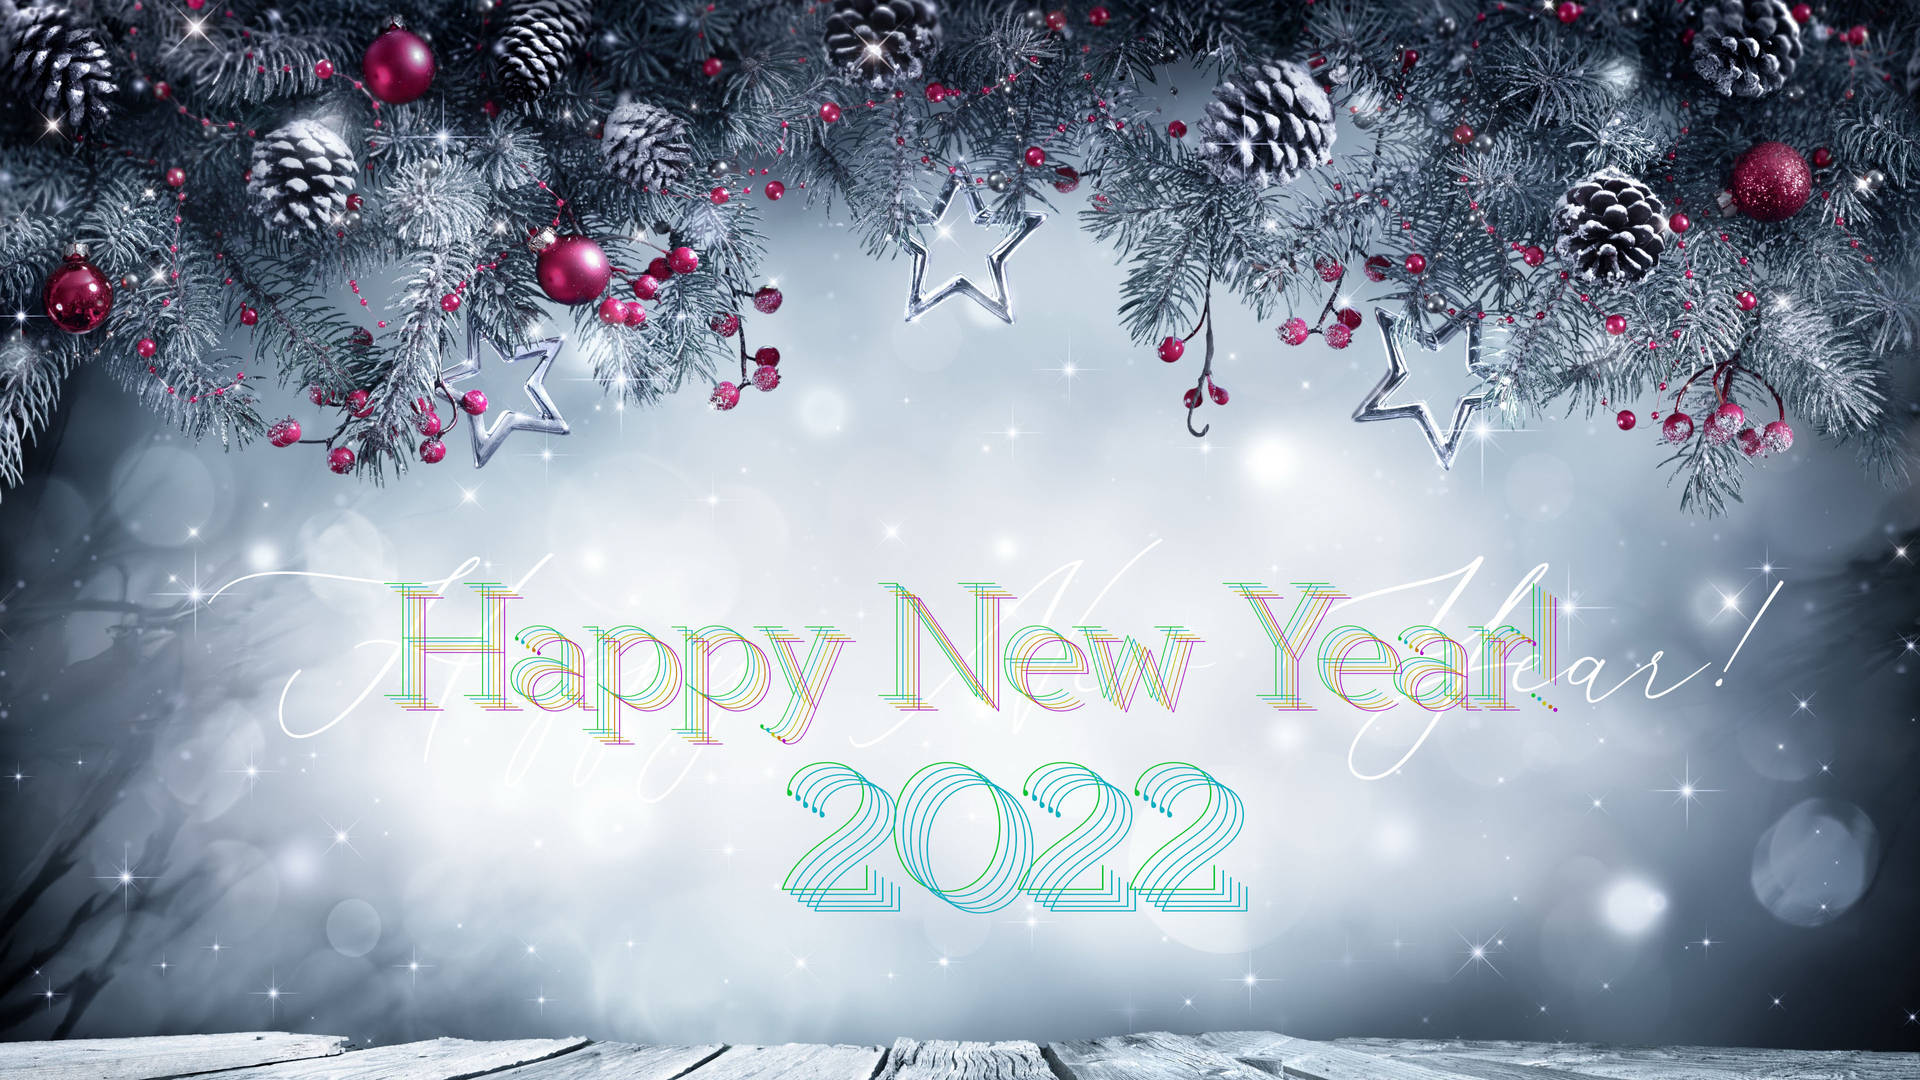 Ringing In 2022 With Style - A Spectacular New Year's Celebration Wallpaper